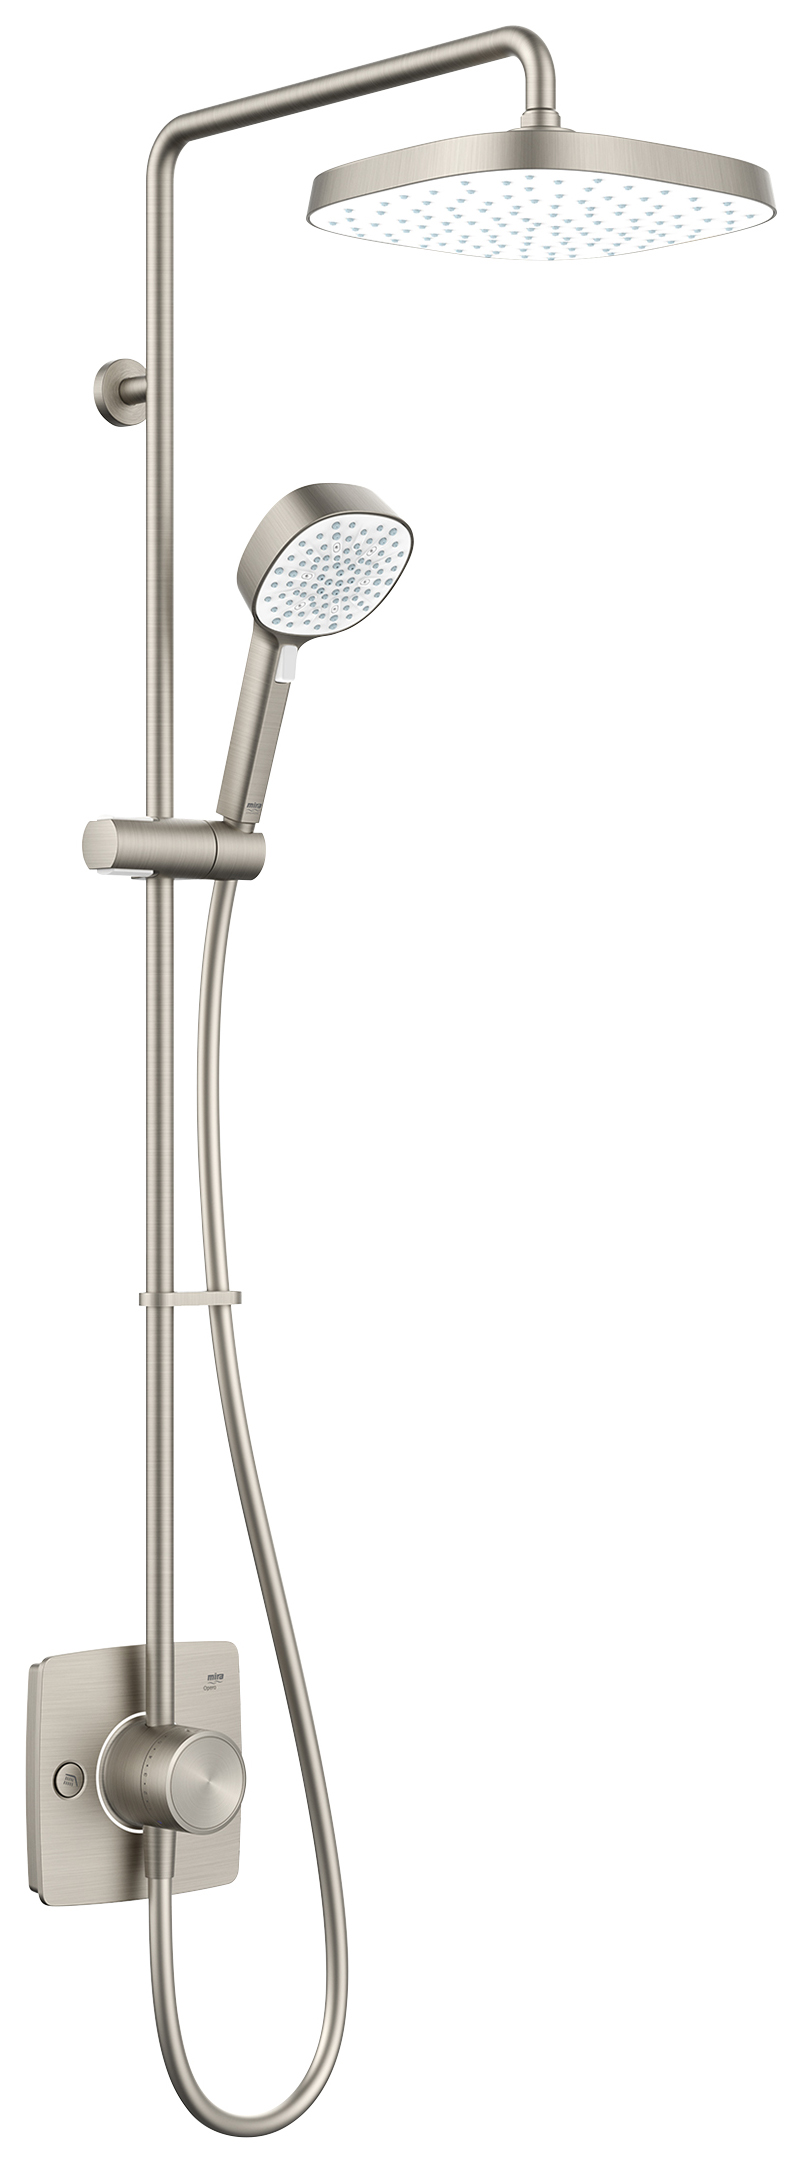 Mira Opero Dual Outlet Mixer Shower with HydroGlo Technology - Brushed Nickel